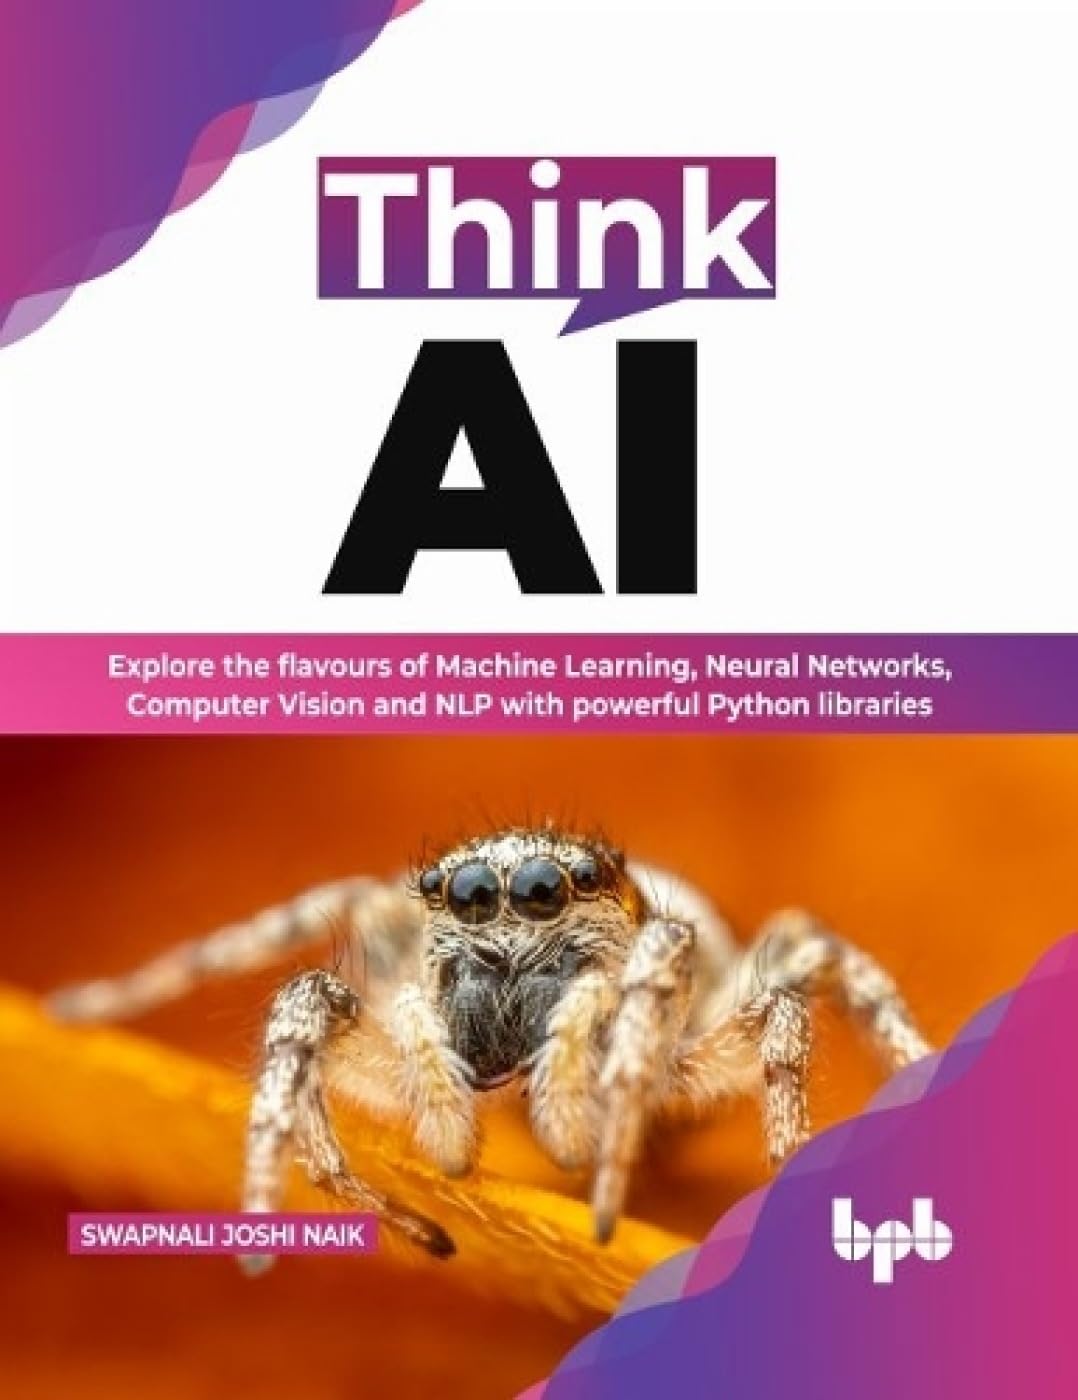 Think AI: Explore the flavours of Machine Learning, Neural Networks, Computer Vision and NLP with powerful python libraries by Swapnali Joshi Naik 